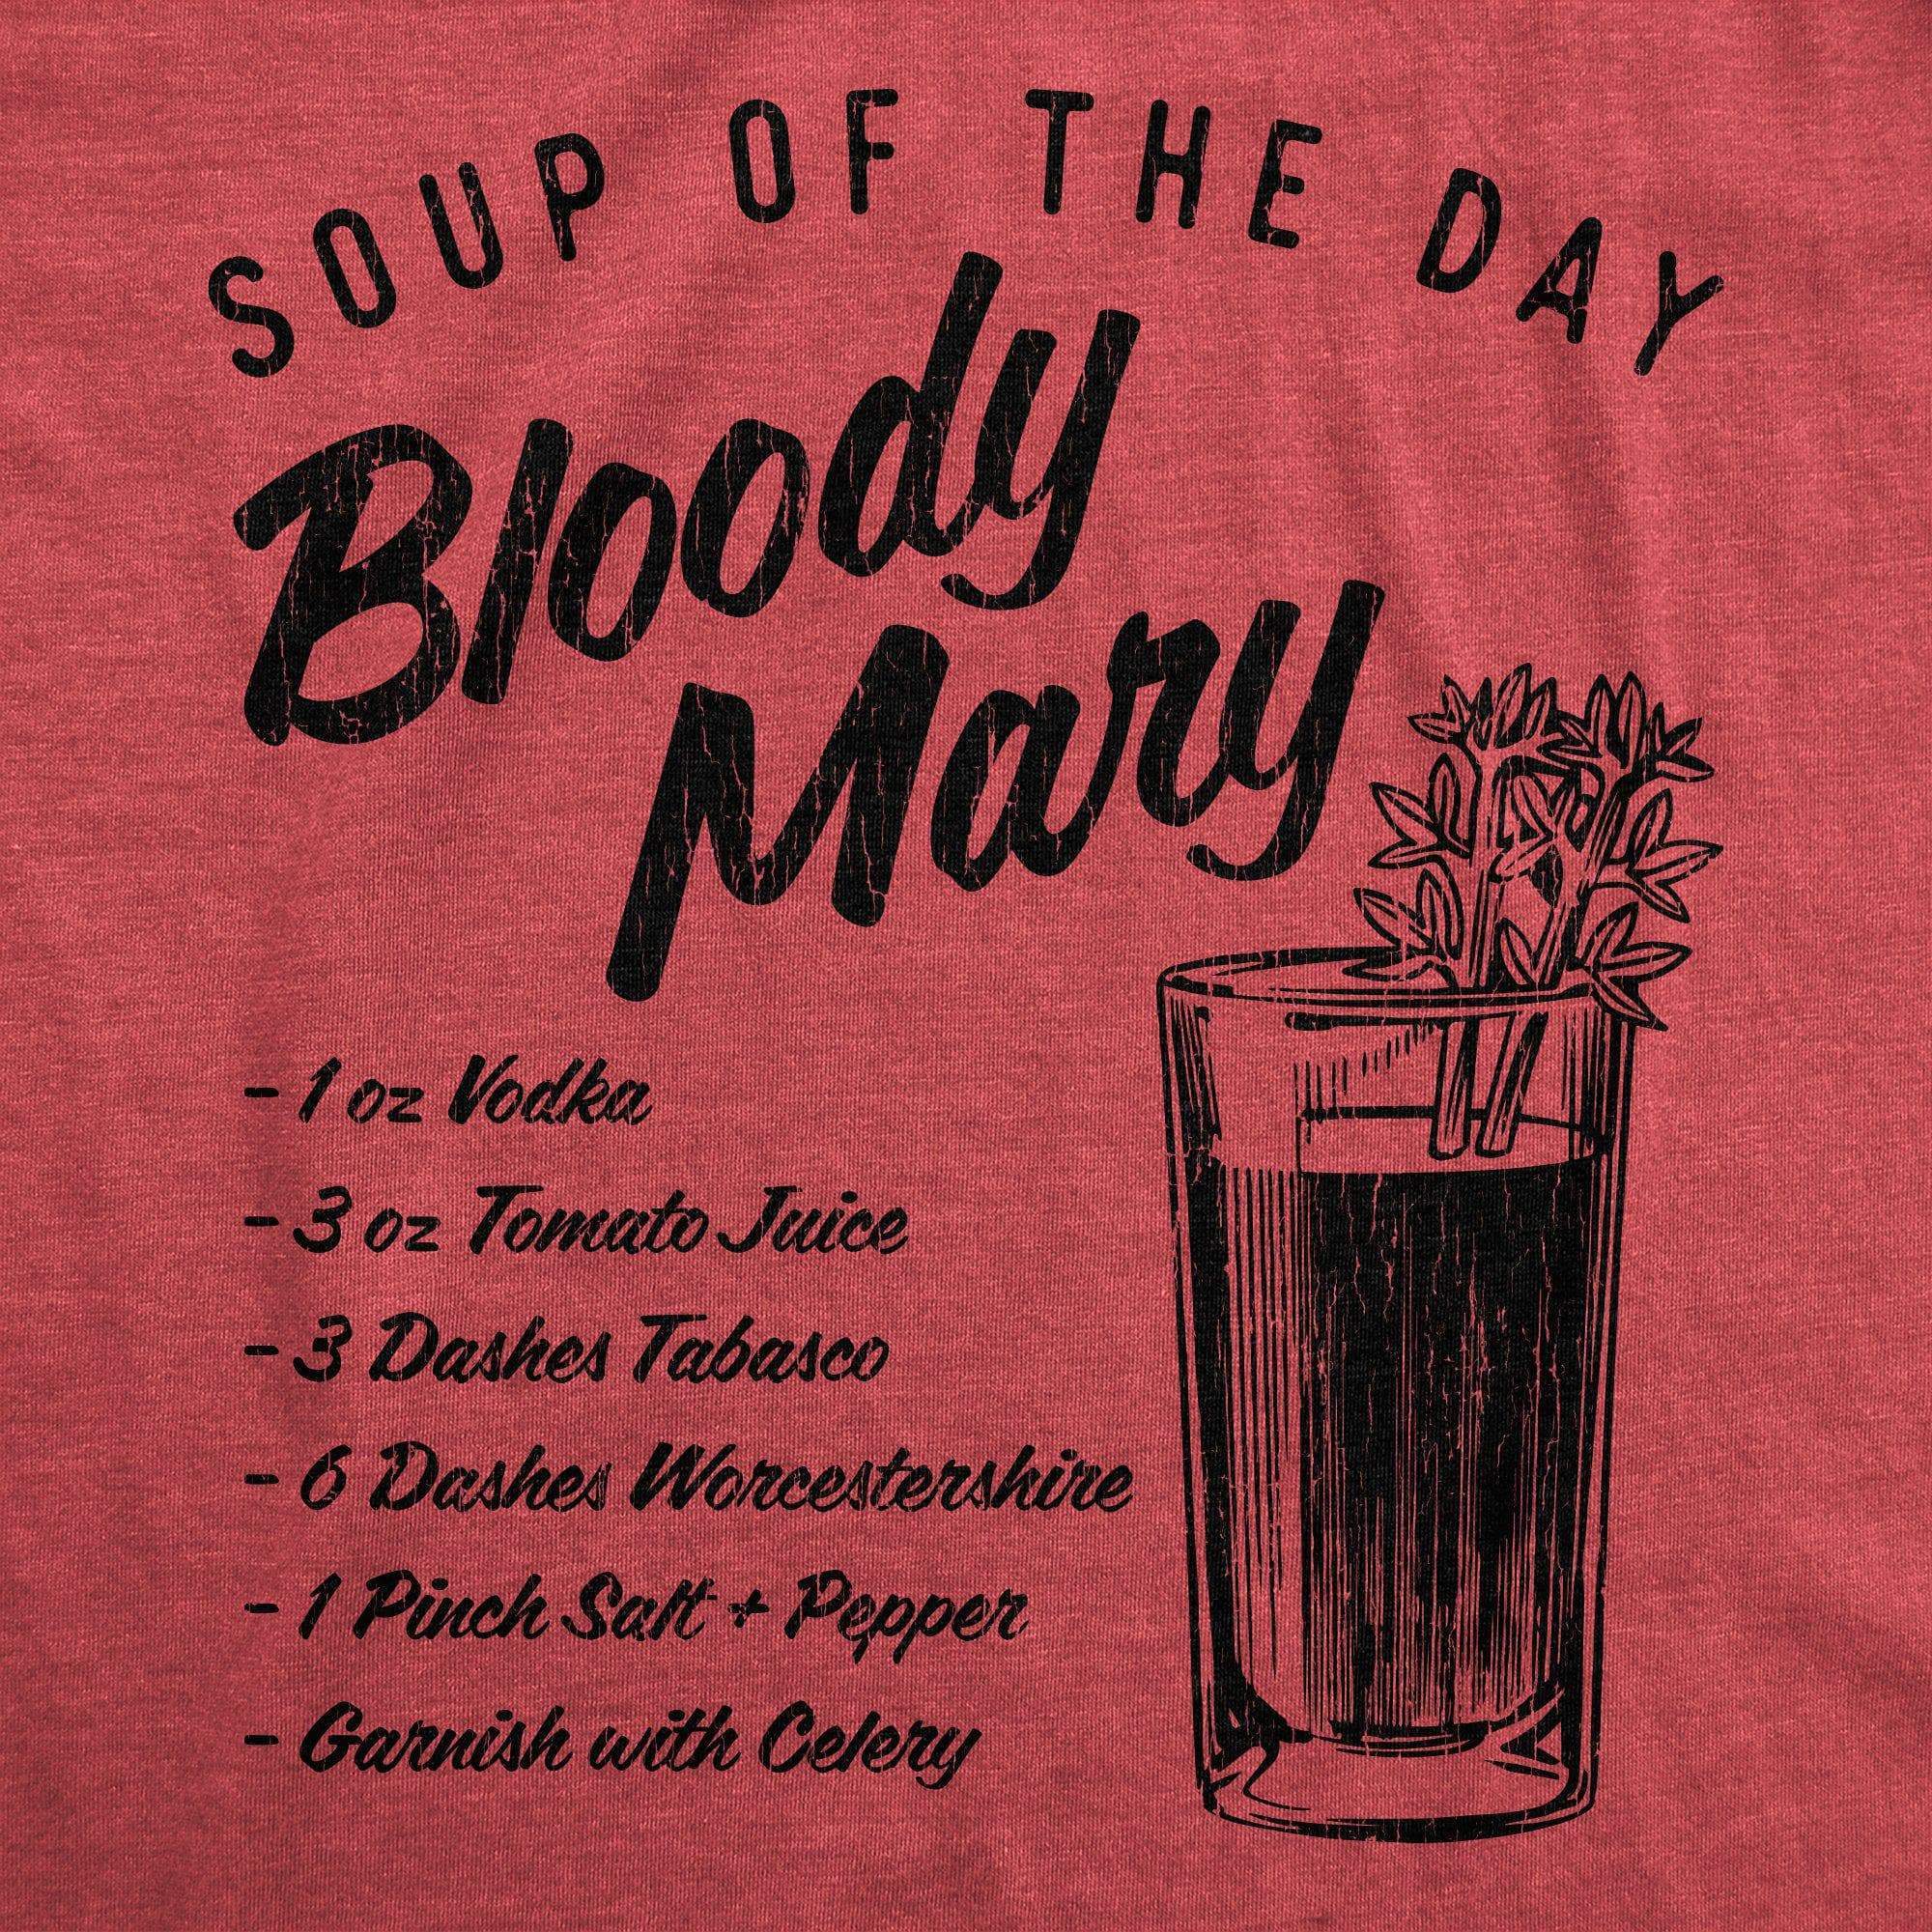 Soup Of The Day Bloody Mary Women's Tshirt - Crazy Dog T-Shirts